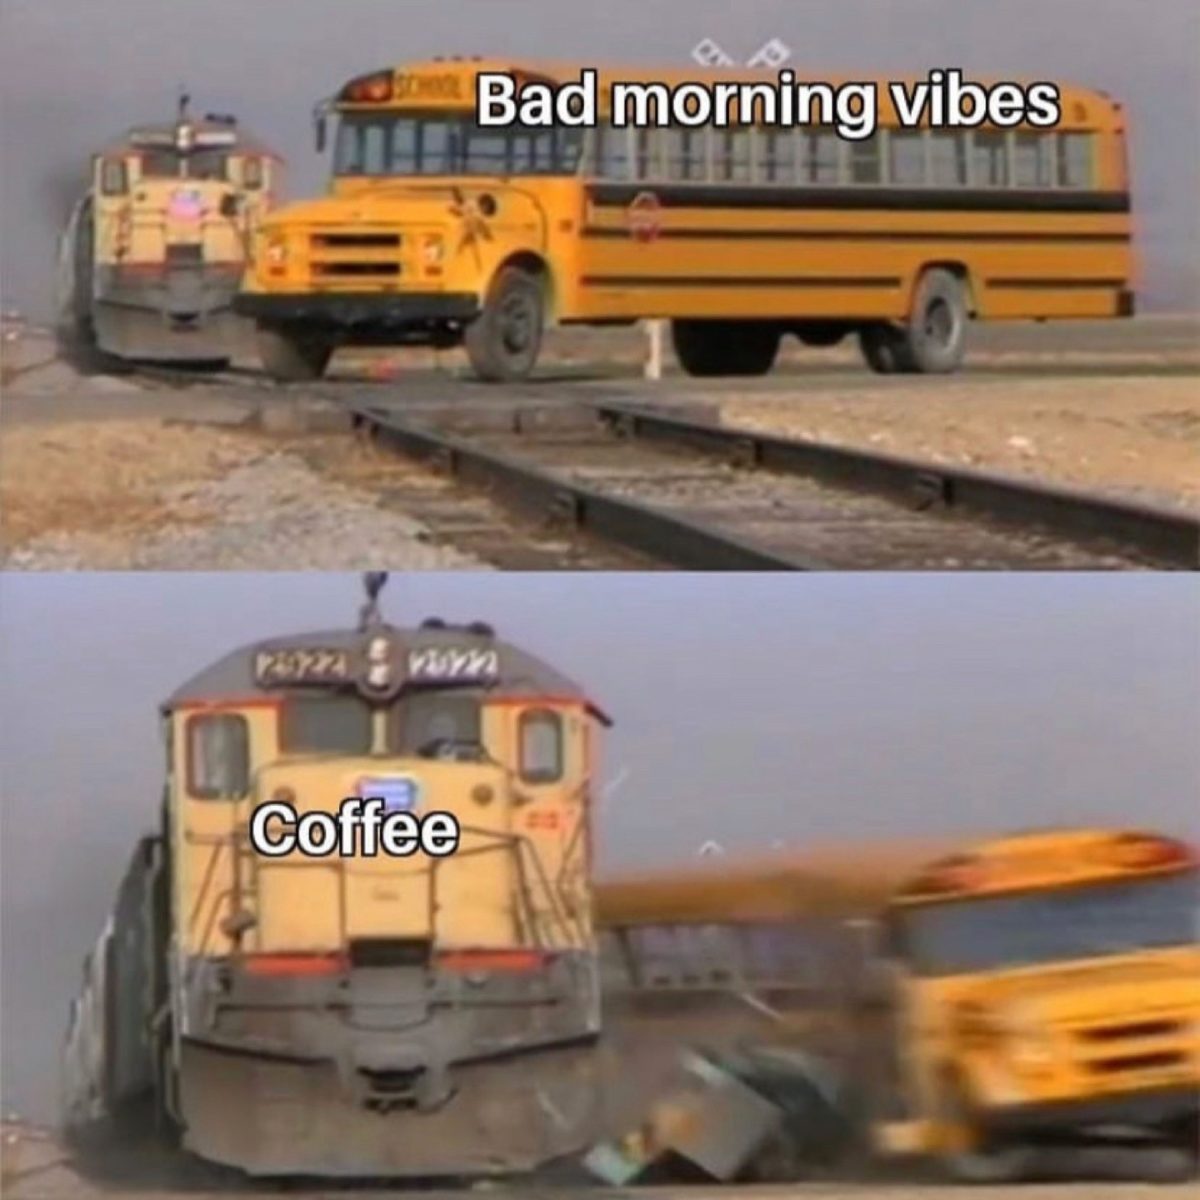 get your fix with these funny coffee memes